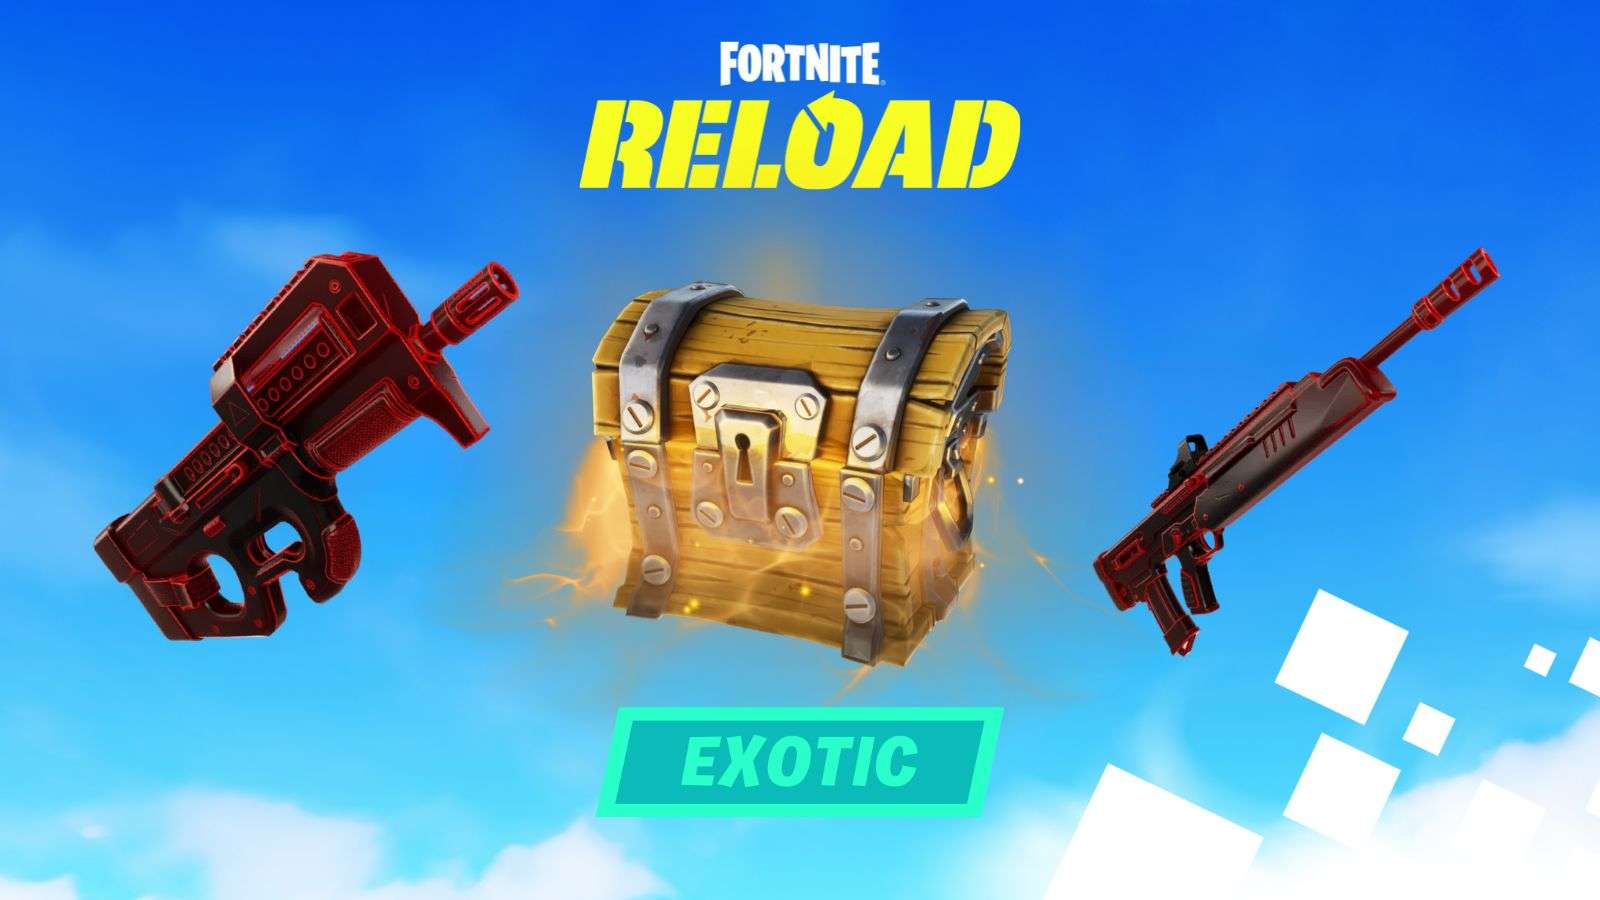 Fortnite Exotic Weapons and Chest in Reload mode